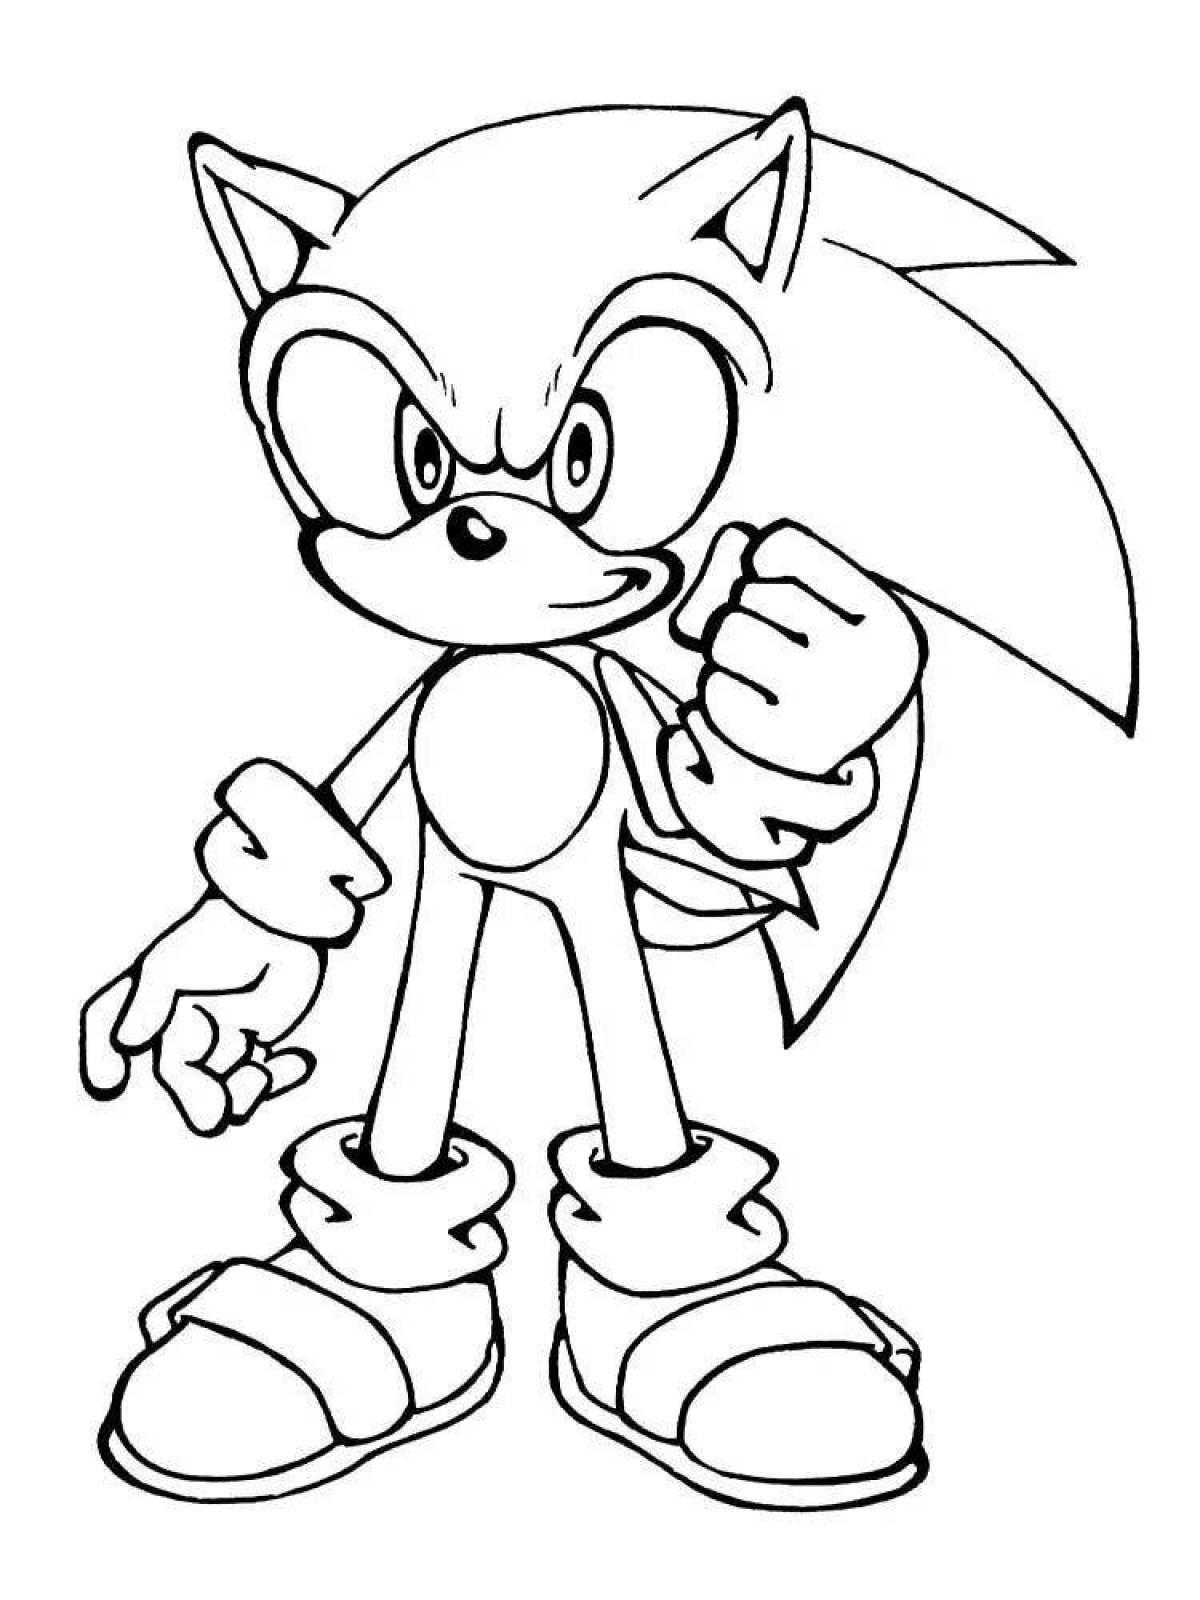 Mega sonic playful coloring page